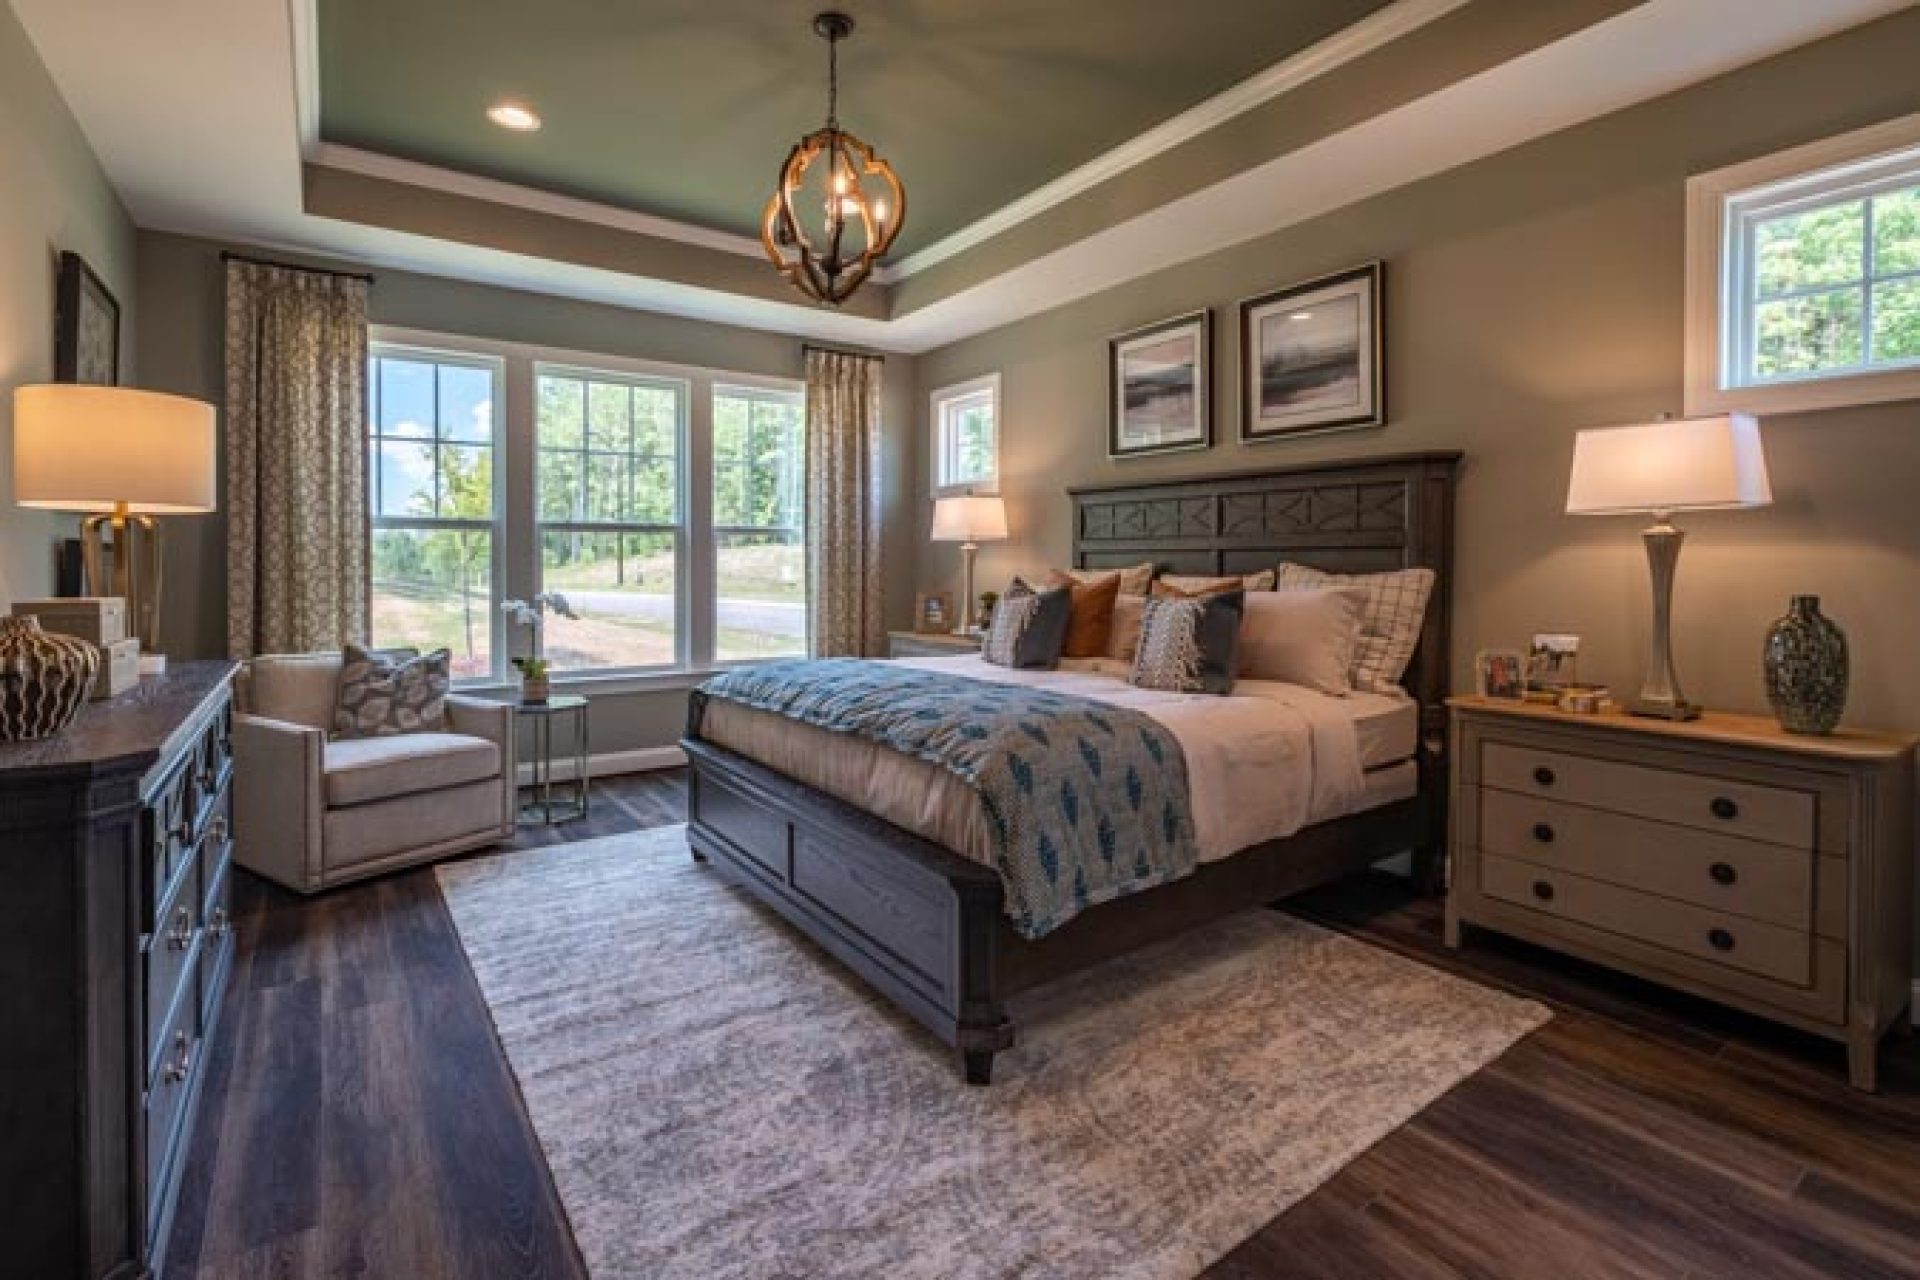 New Homes in Apex, NC | Bridlewood at Friendship Place | HHHunt Homes